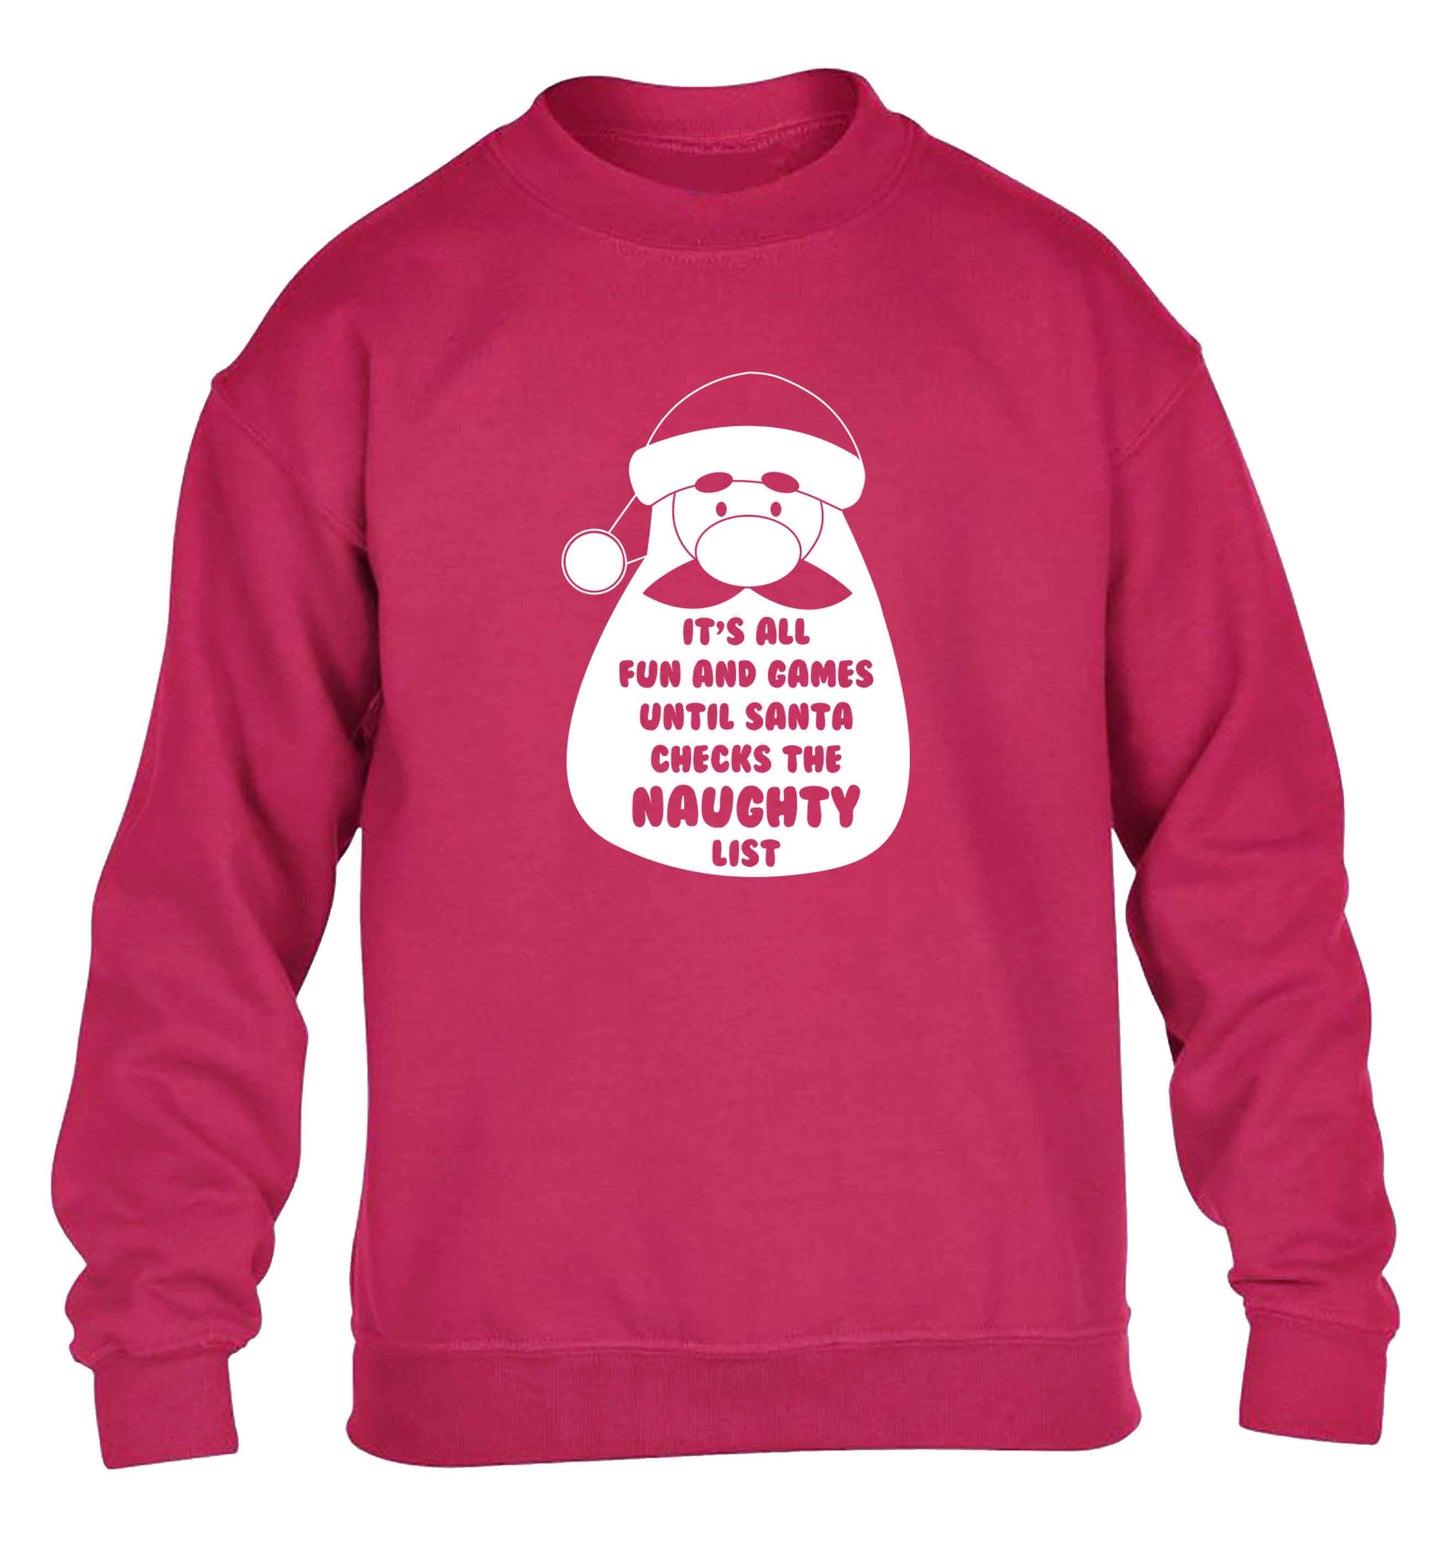 It's all fun and games until Santa checks the naughty list children's pink sweater 12-13 Years